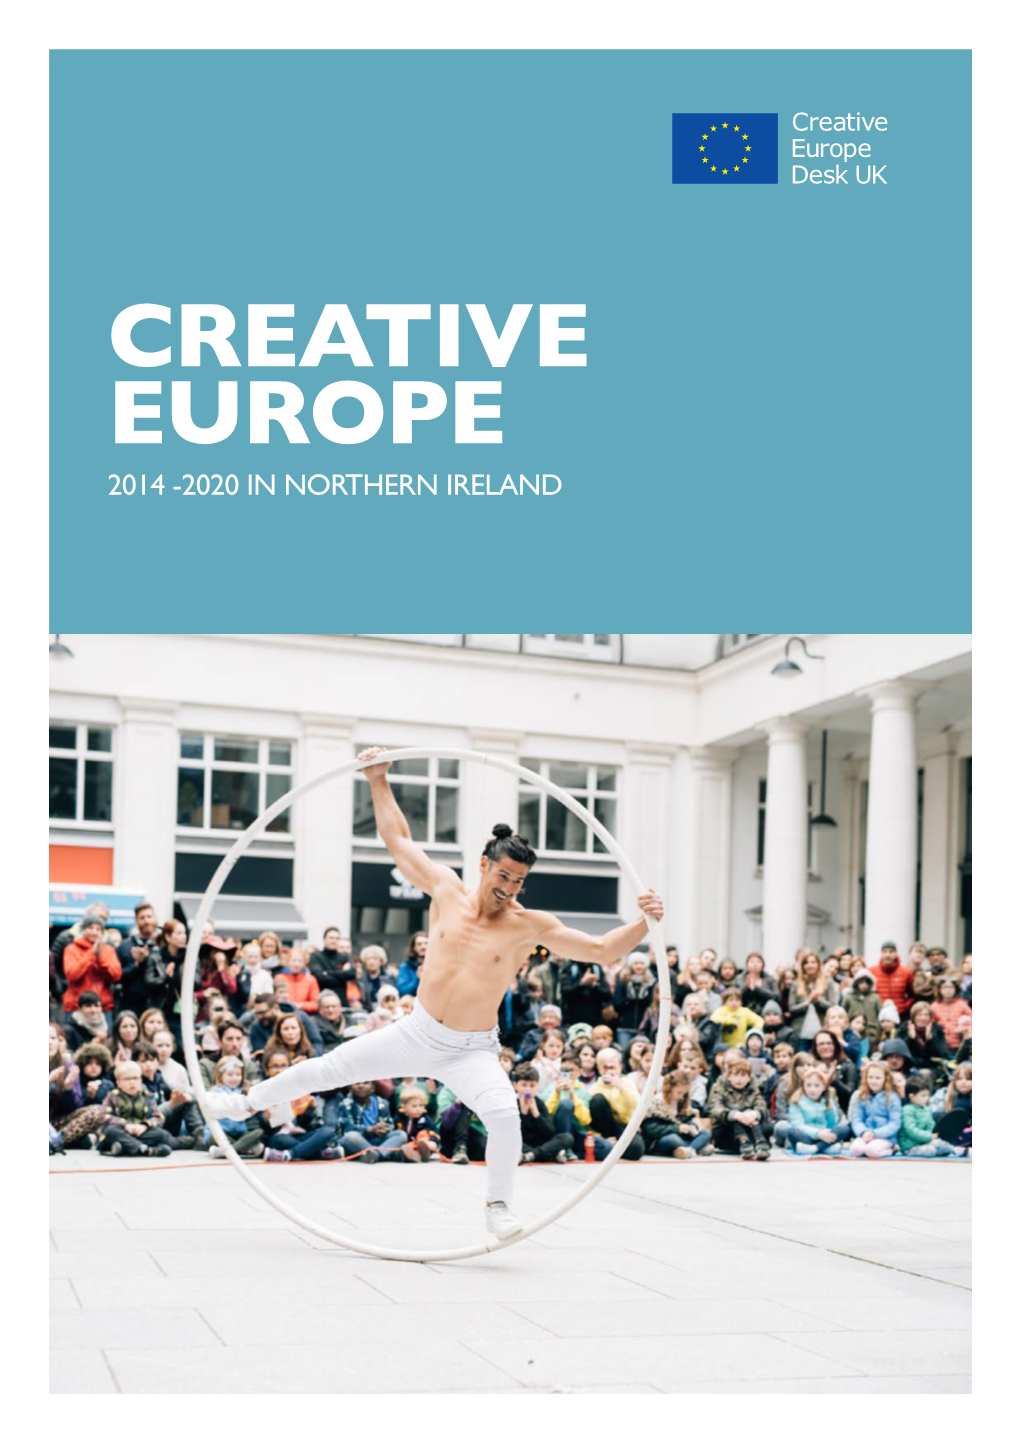 Read About the Impact of Creative Europe in NI 2014-20